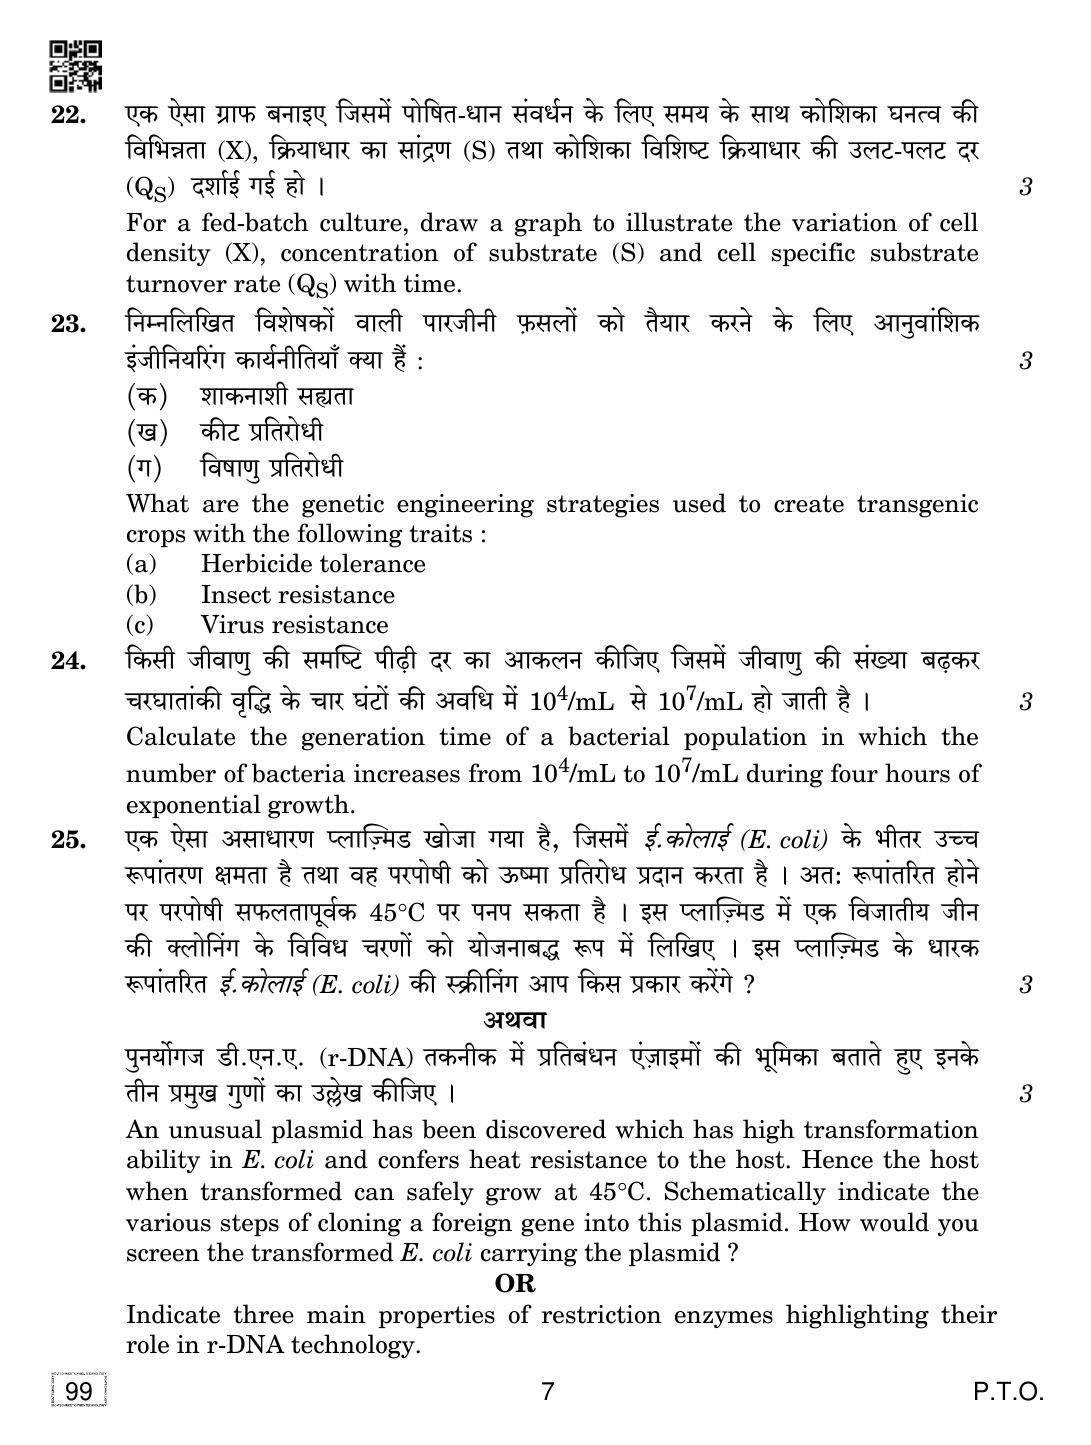 CBSE Class 12 99 BIOTECHNOLOGY 2019 Compartment Question Paper - Page 7